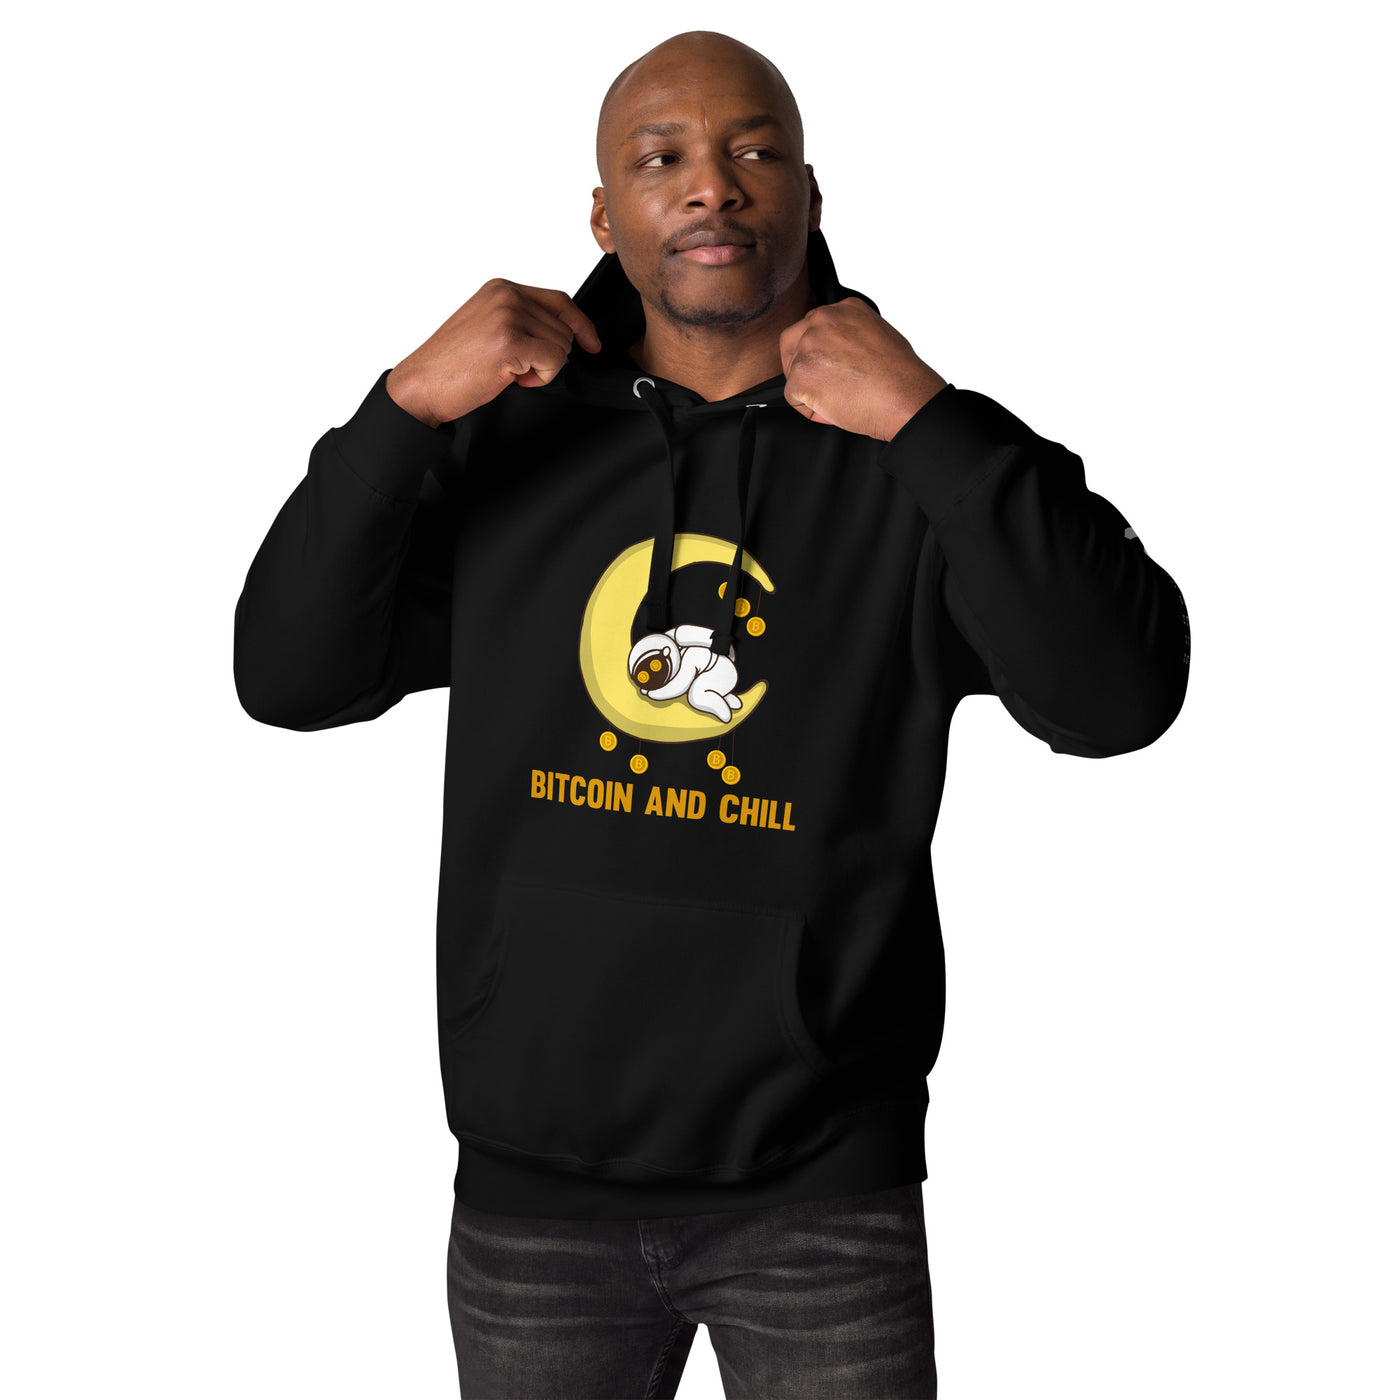 Bitcoin and Chill - Unisex Hoodie